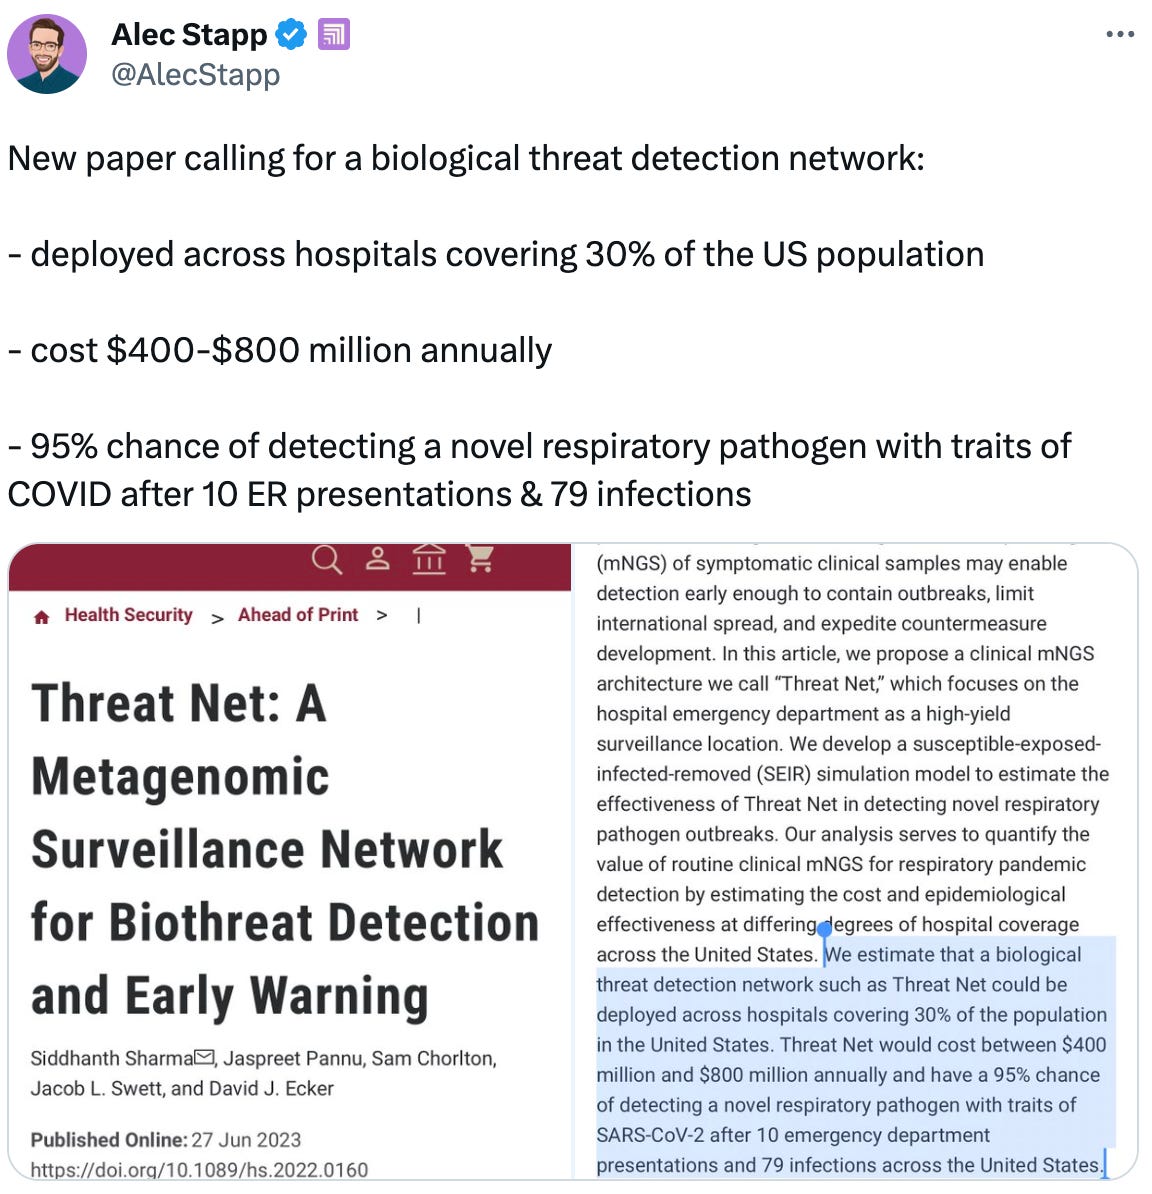  Alec Stapp  @AlecStapp New paper calling for a biological threat detection network:   - deployed across hospitals covering 30% of the US population  - cost $400-$800 million annually  - 95% chance of detecting a novel respiratory pathogen with traits of COVID after 10 ER presentations & 79 infections